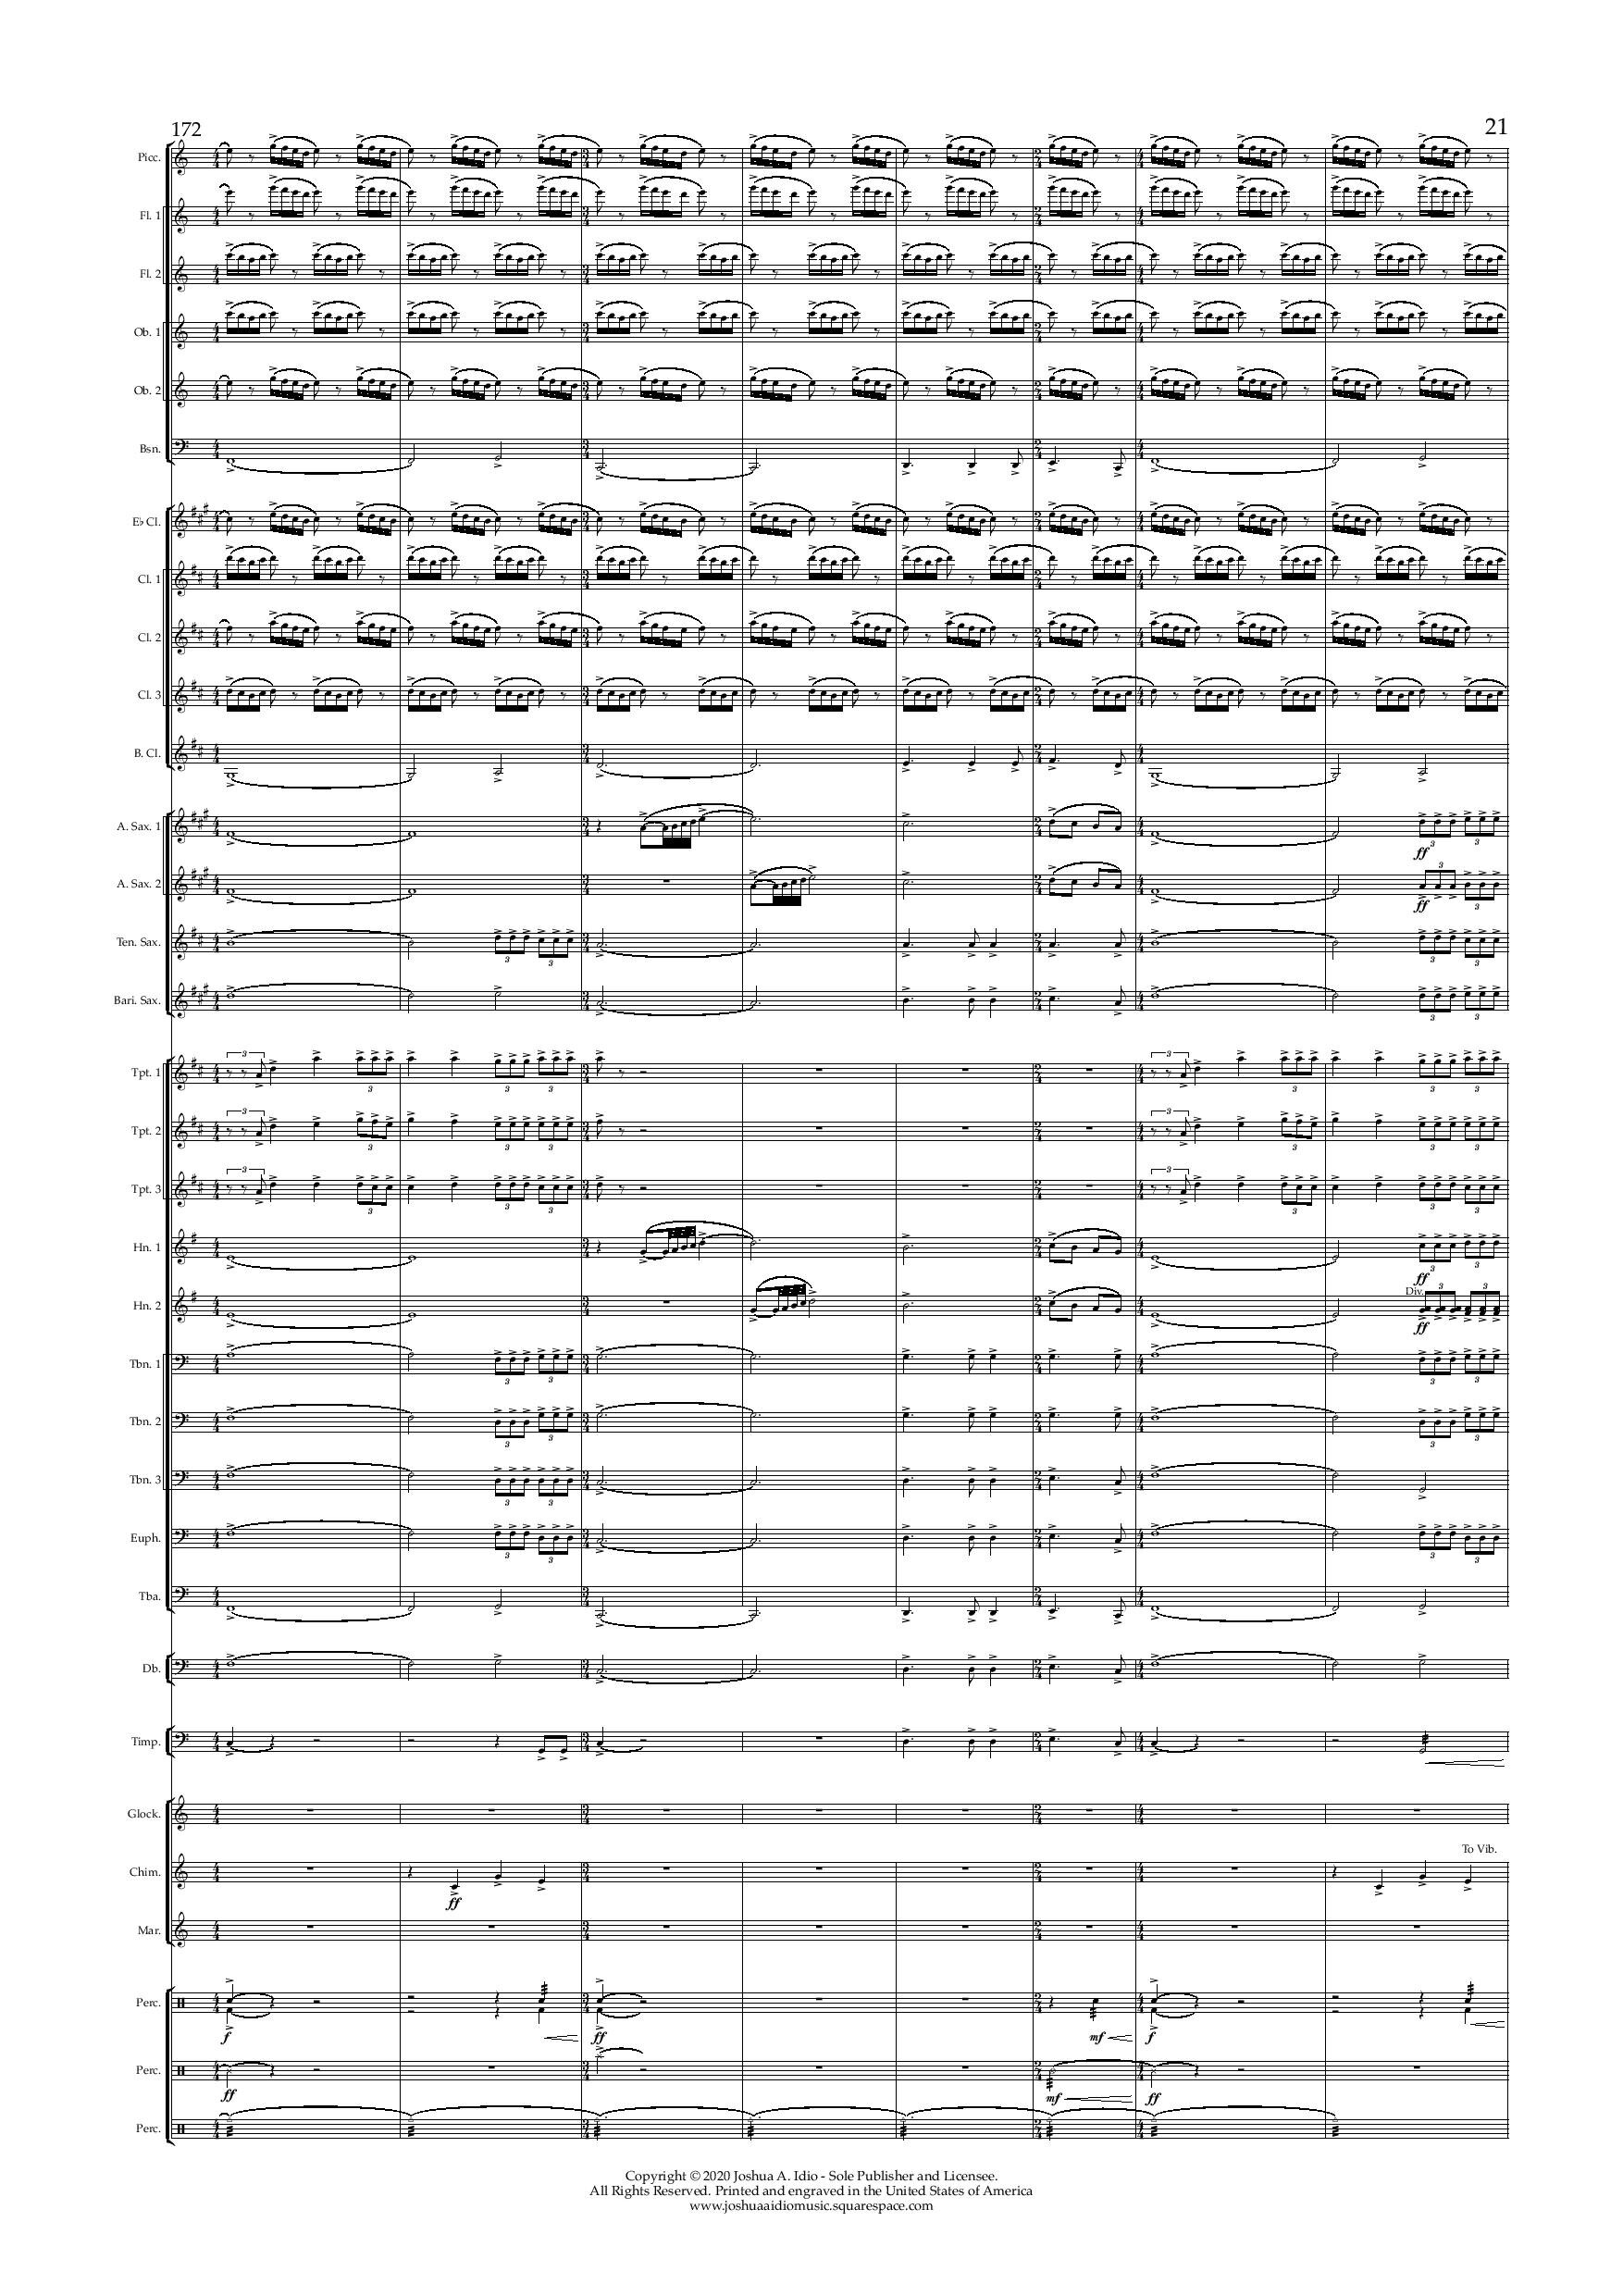 The Cruise Line Dream - Conductor s Score-page-021.jpg